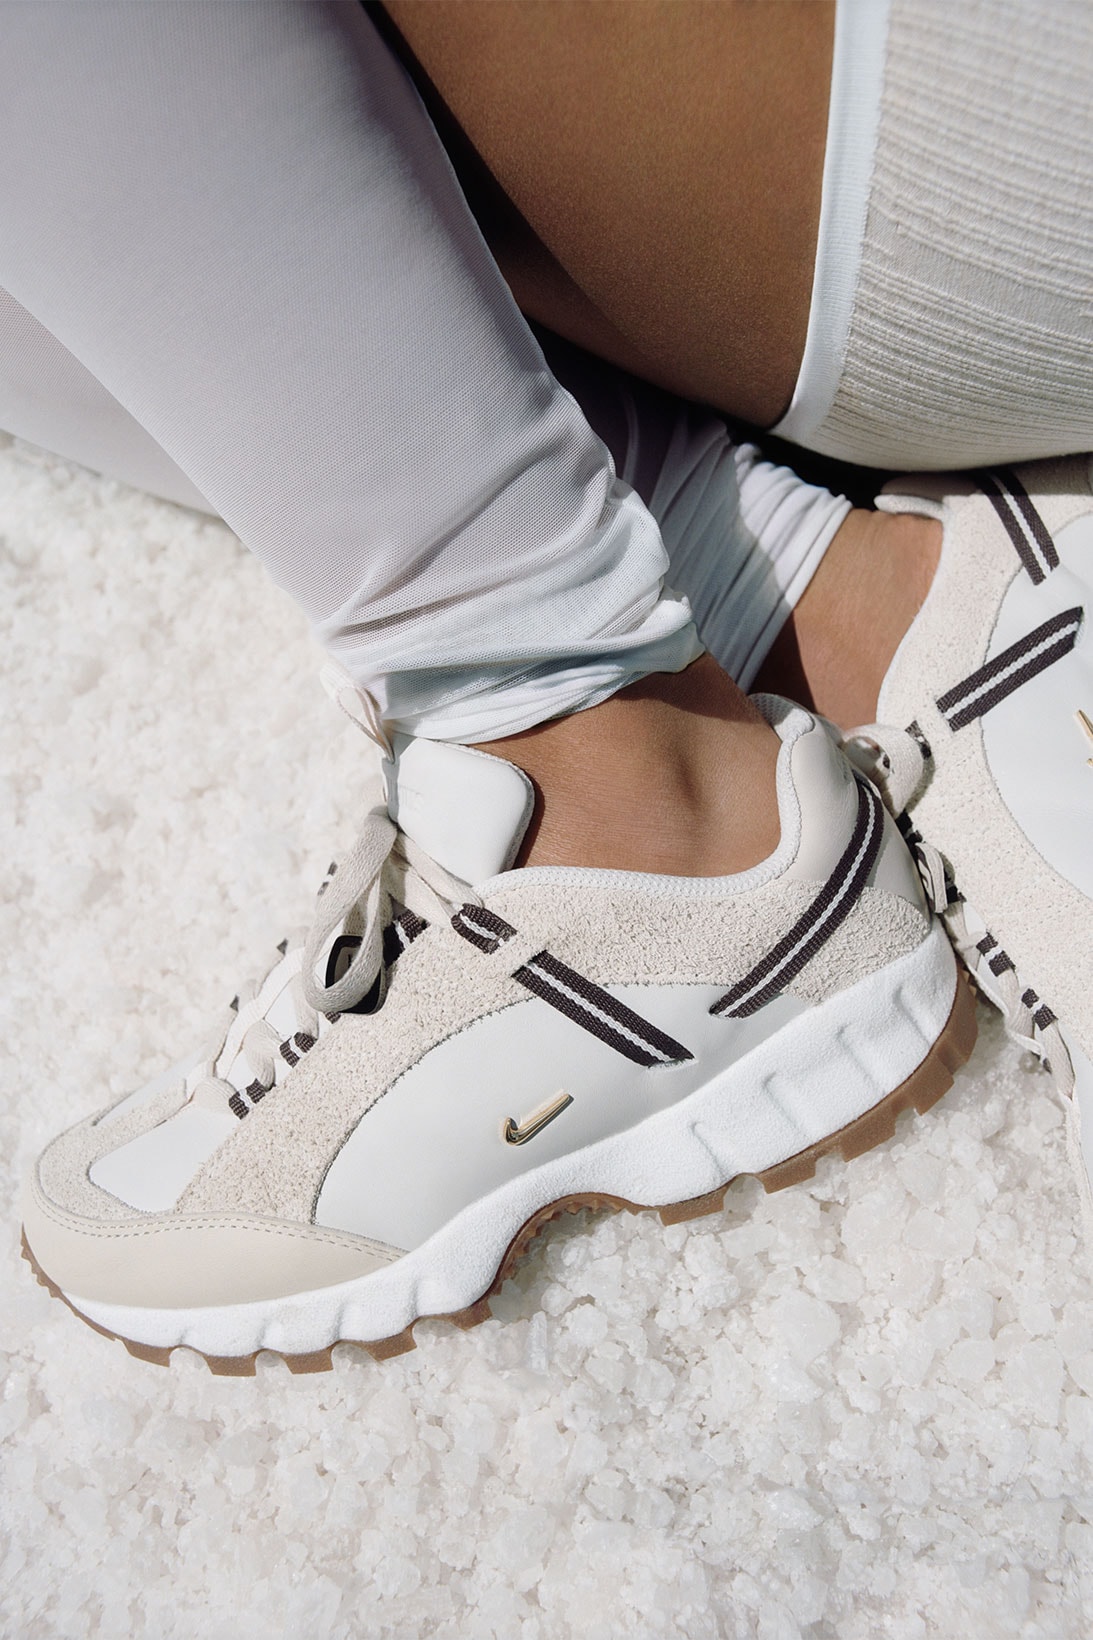 Jacquemus Nike Collaboration Simon Porte Collection Full Look Images Humara SNKRS Release Date